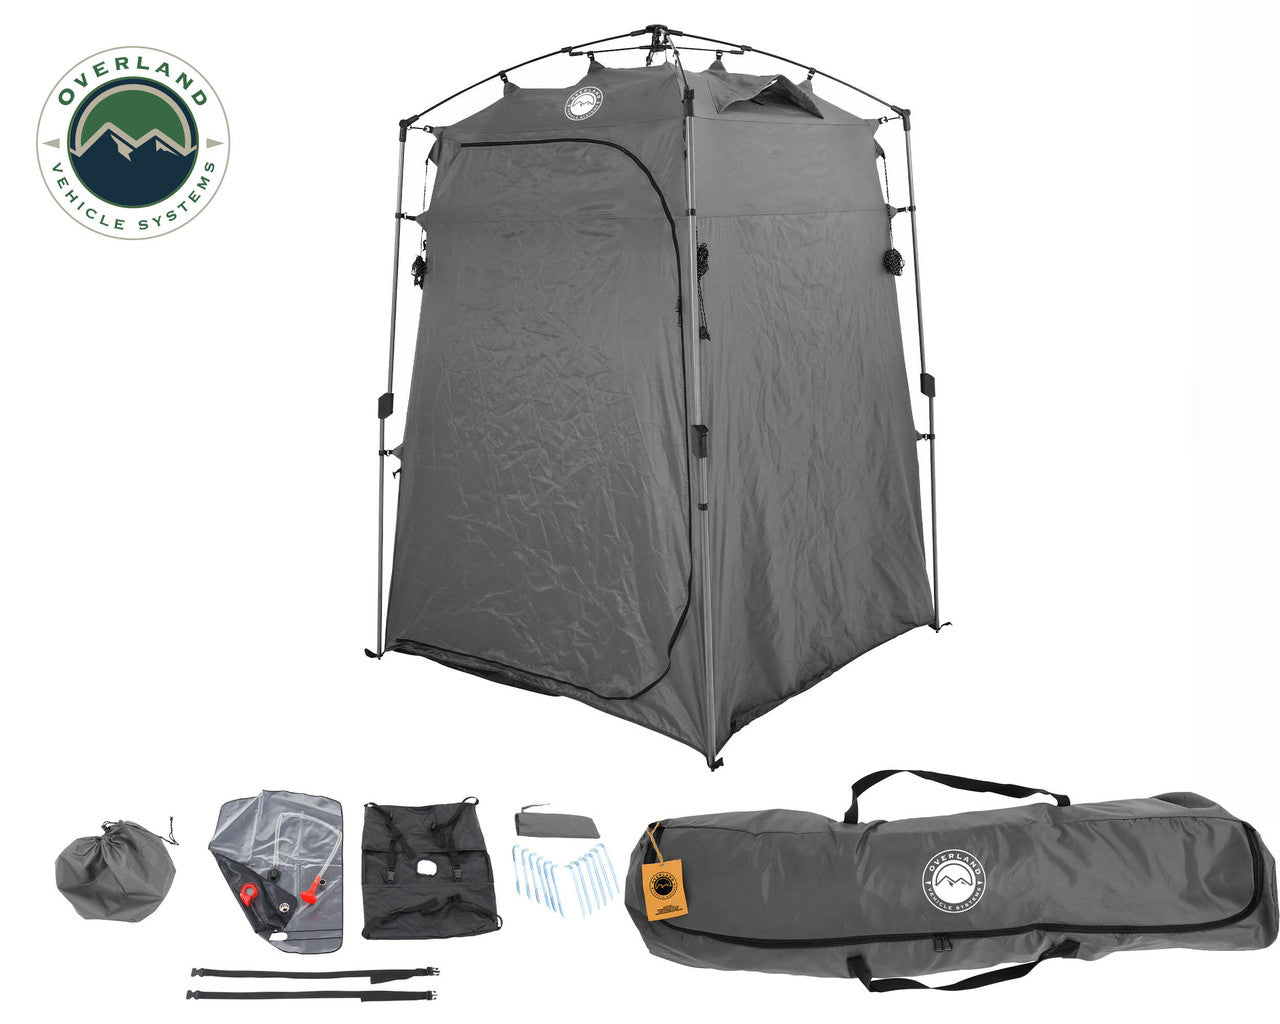 Overland Vehicle Systems OVS Portable Privacy Room With Shower Preview